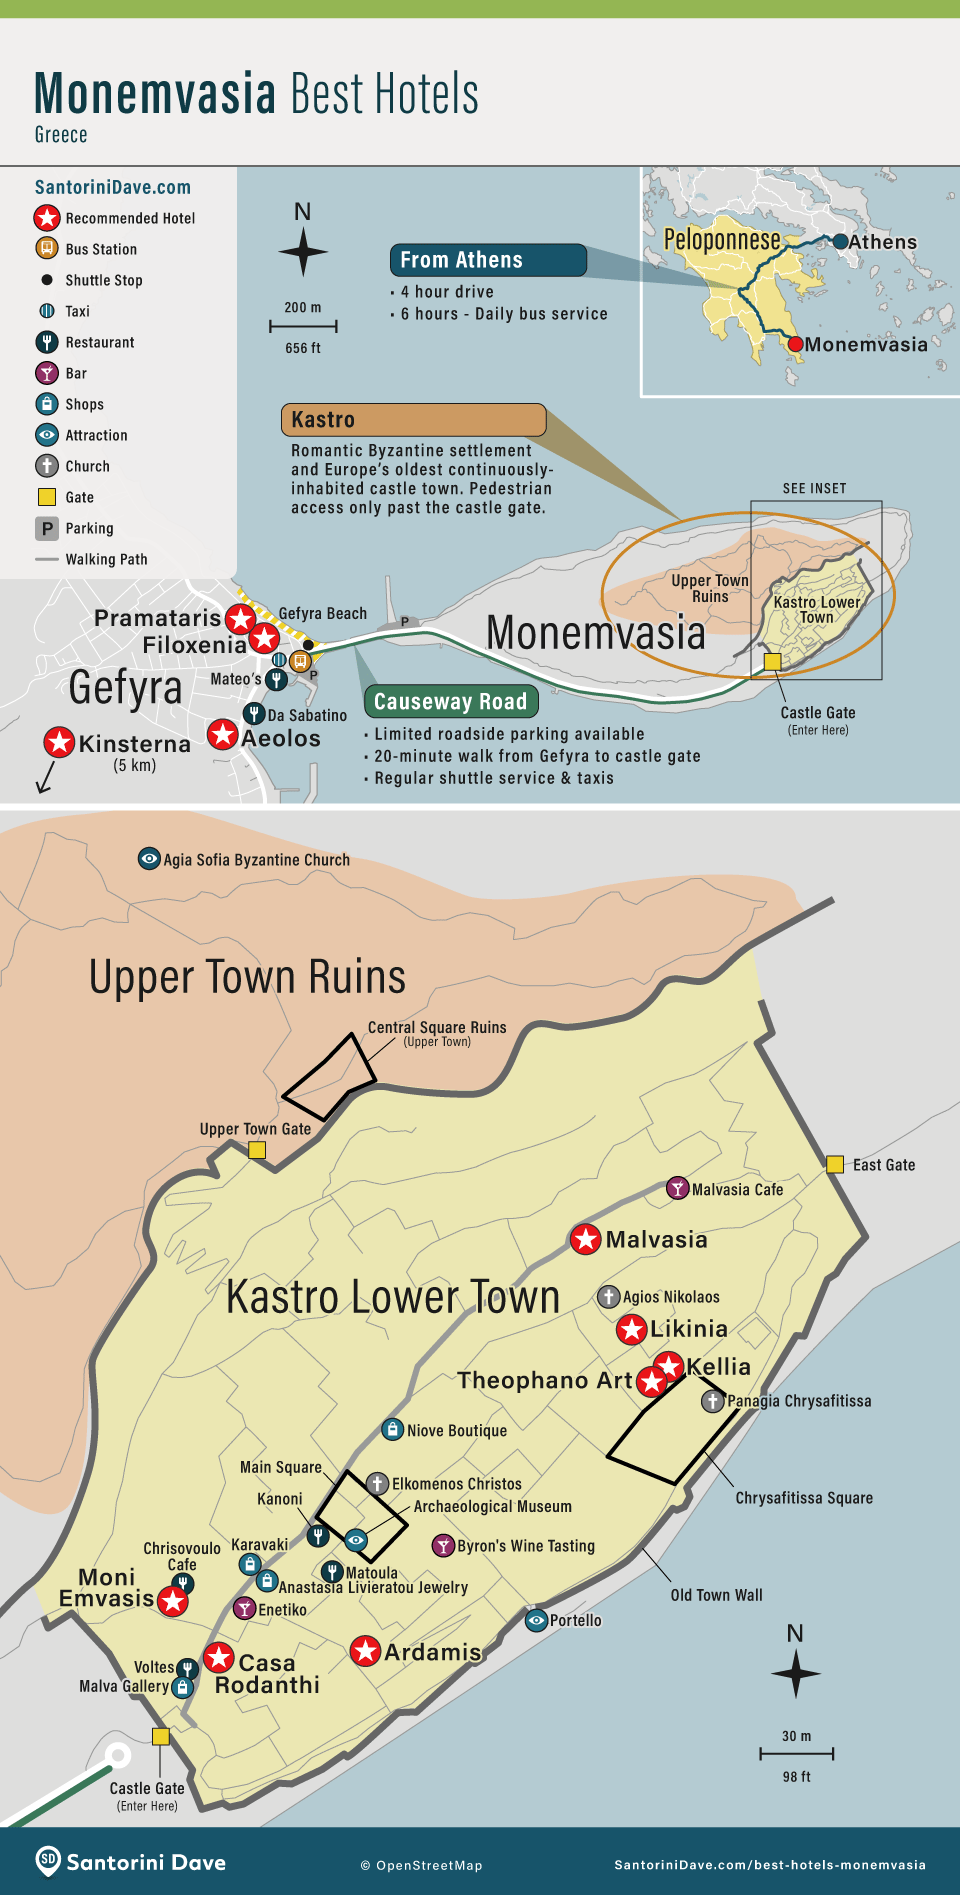 Map showing the locations of the best hotels in Monemvasia, Greece